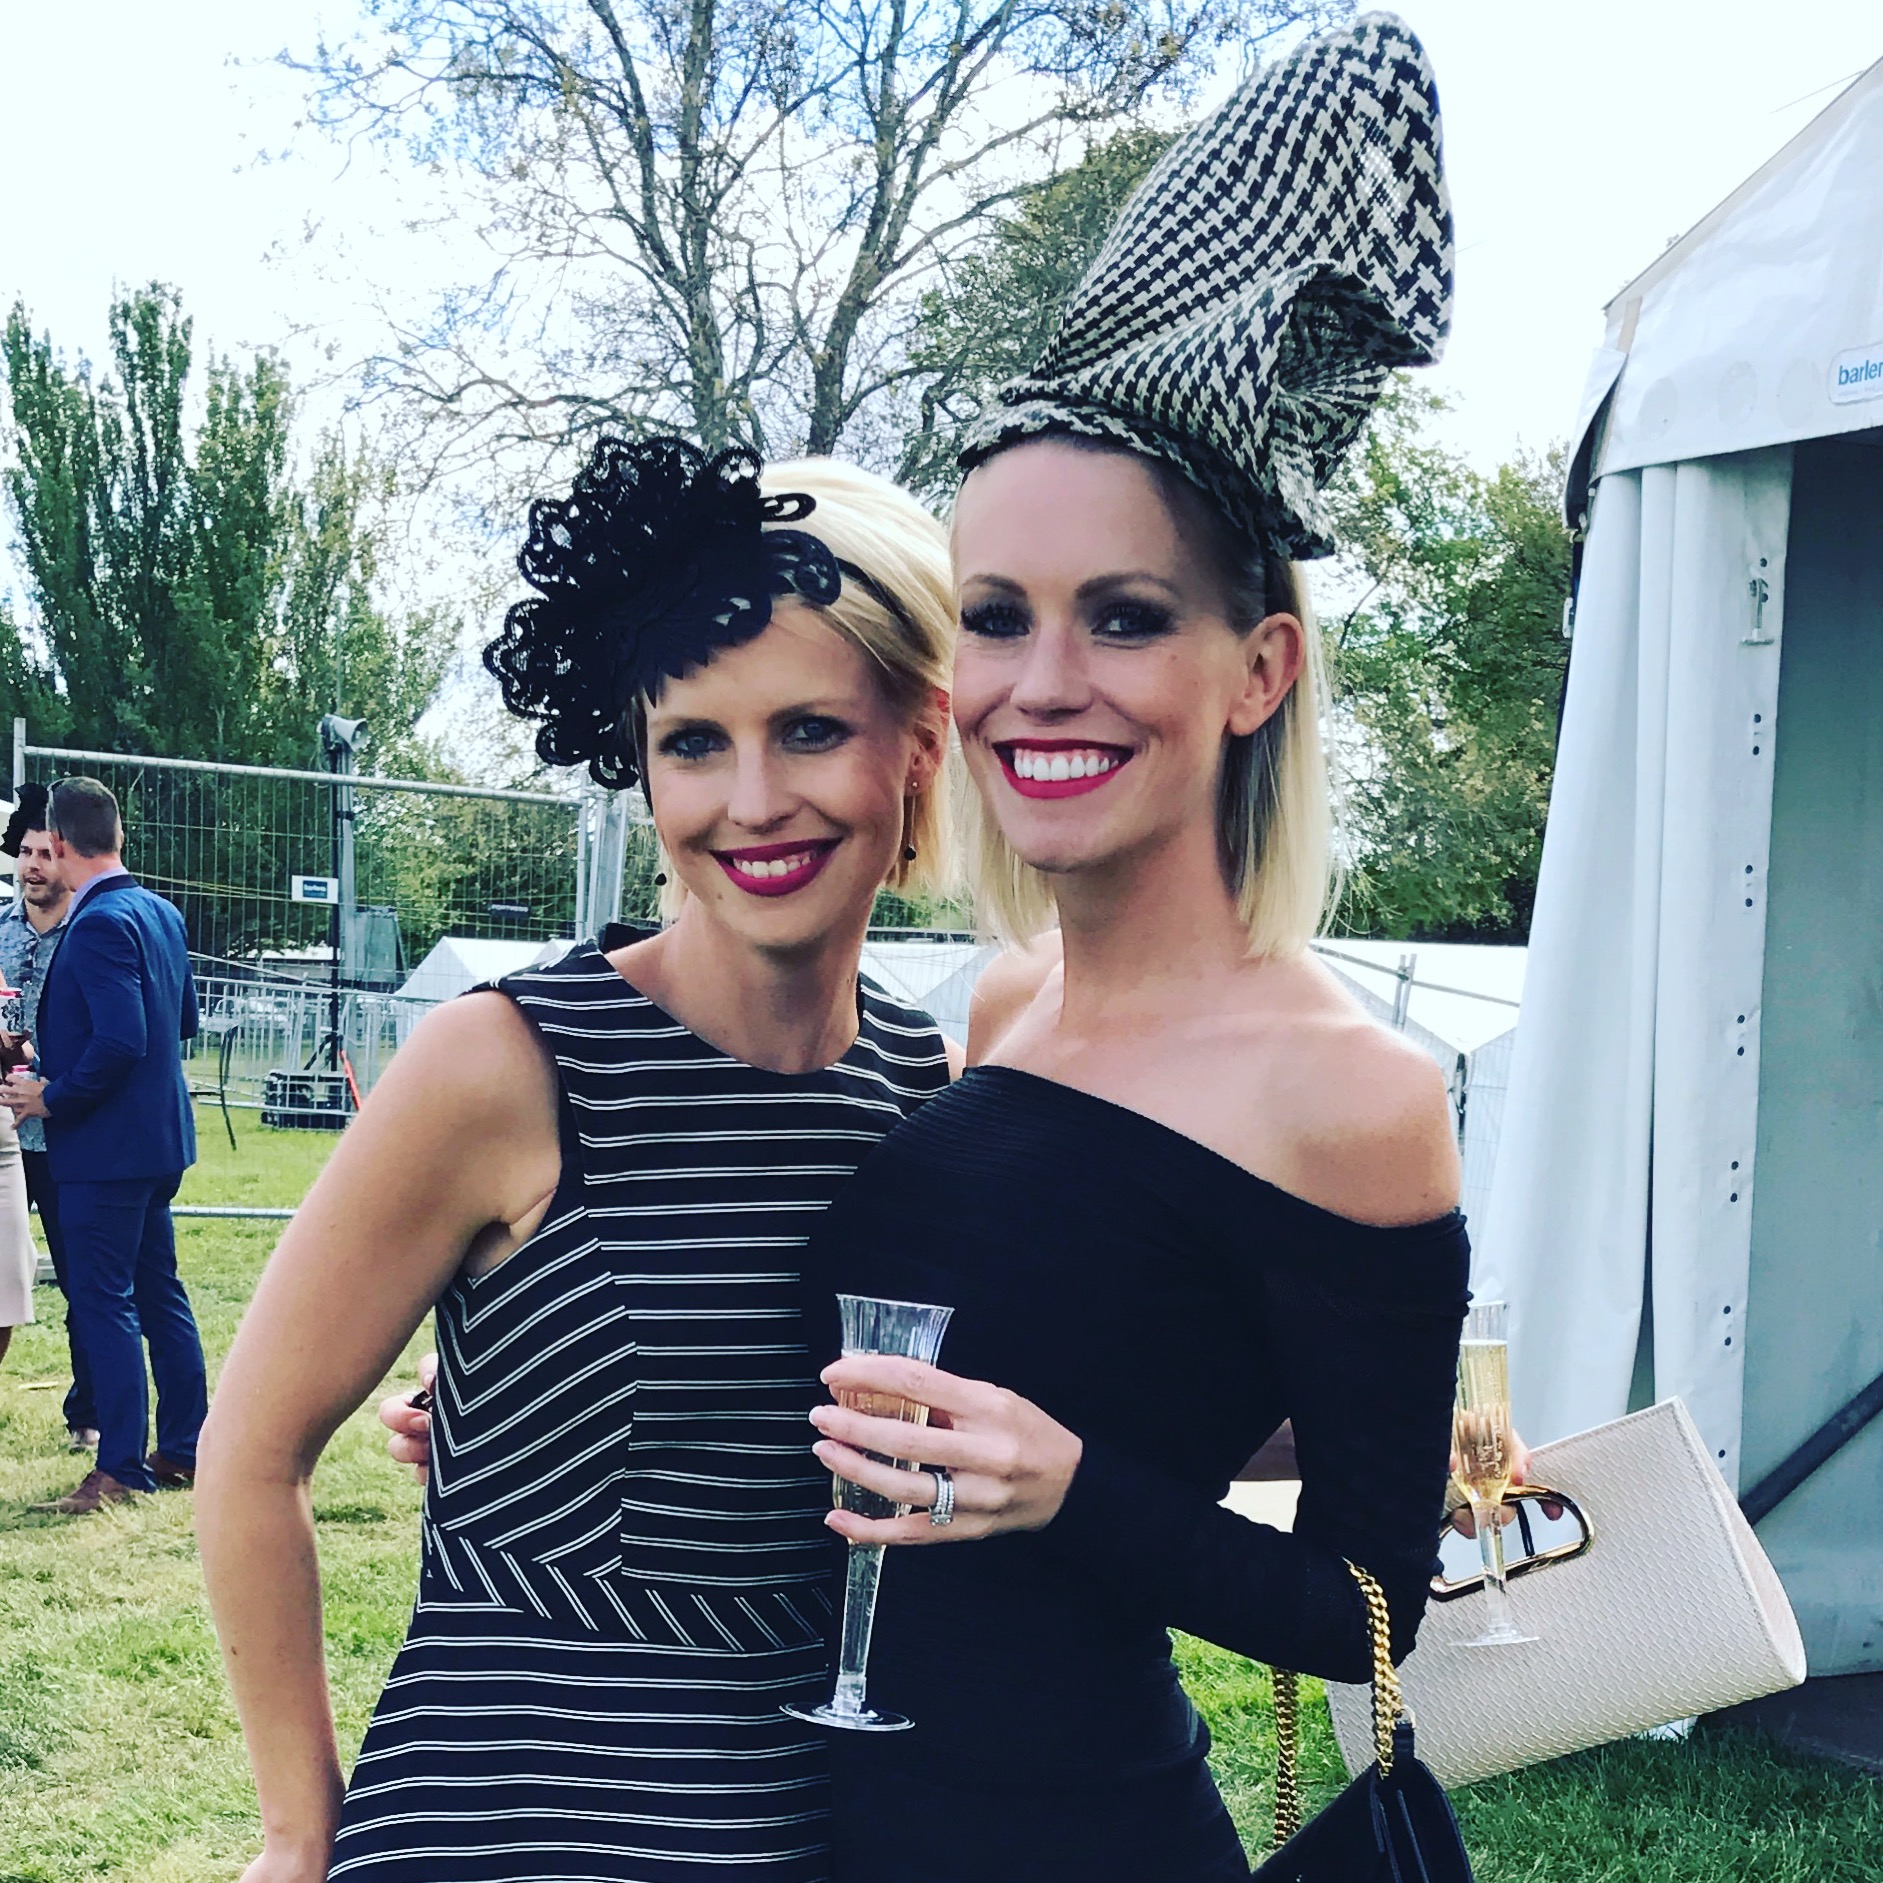 Danielle Ridgway and Alyse Allender. Ms Allender created the fascinator her sister is wearing and her own stunning hat. Photo: Charlotte Harper